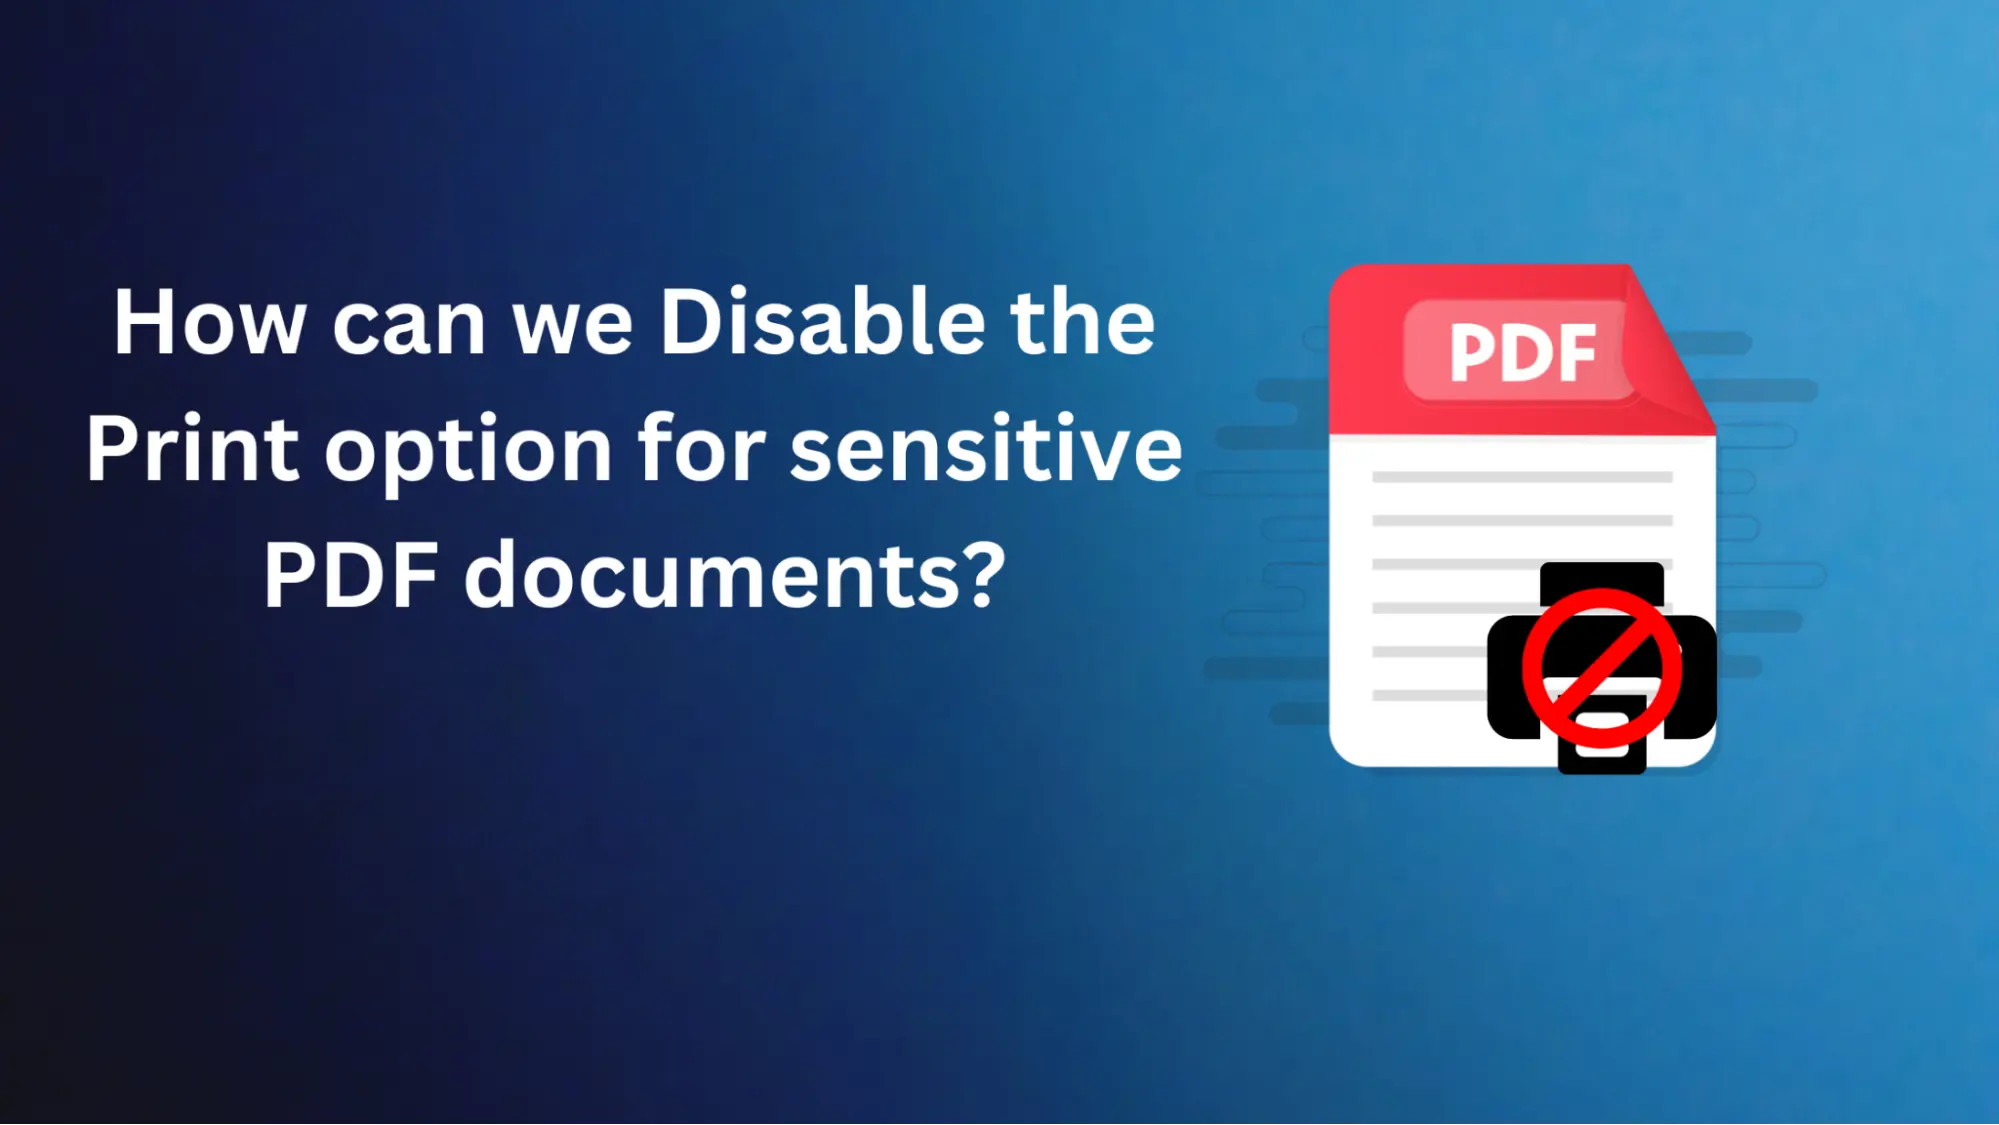 How can we Disable the Print option for sensitive PDF documents?